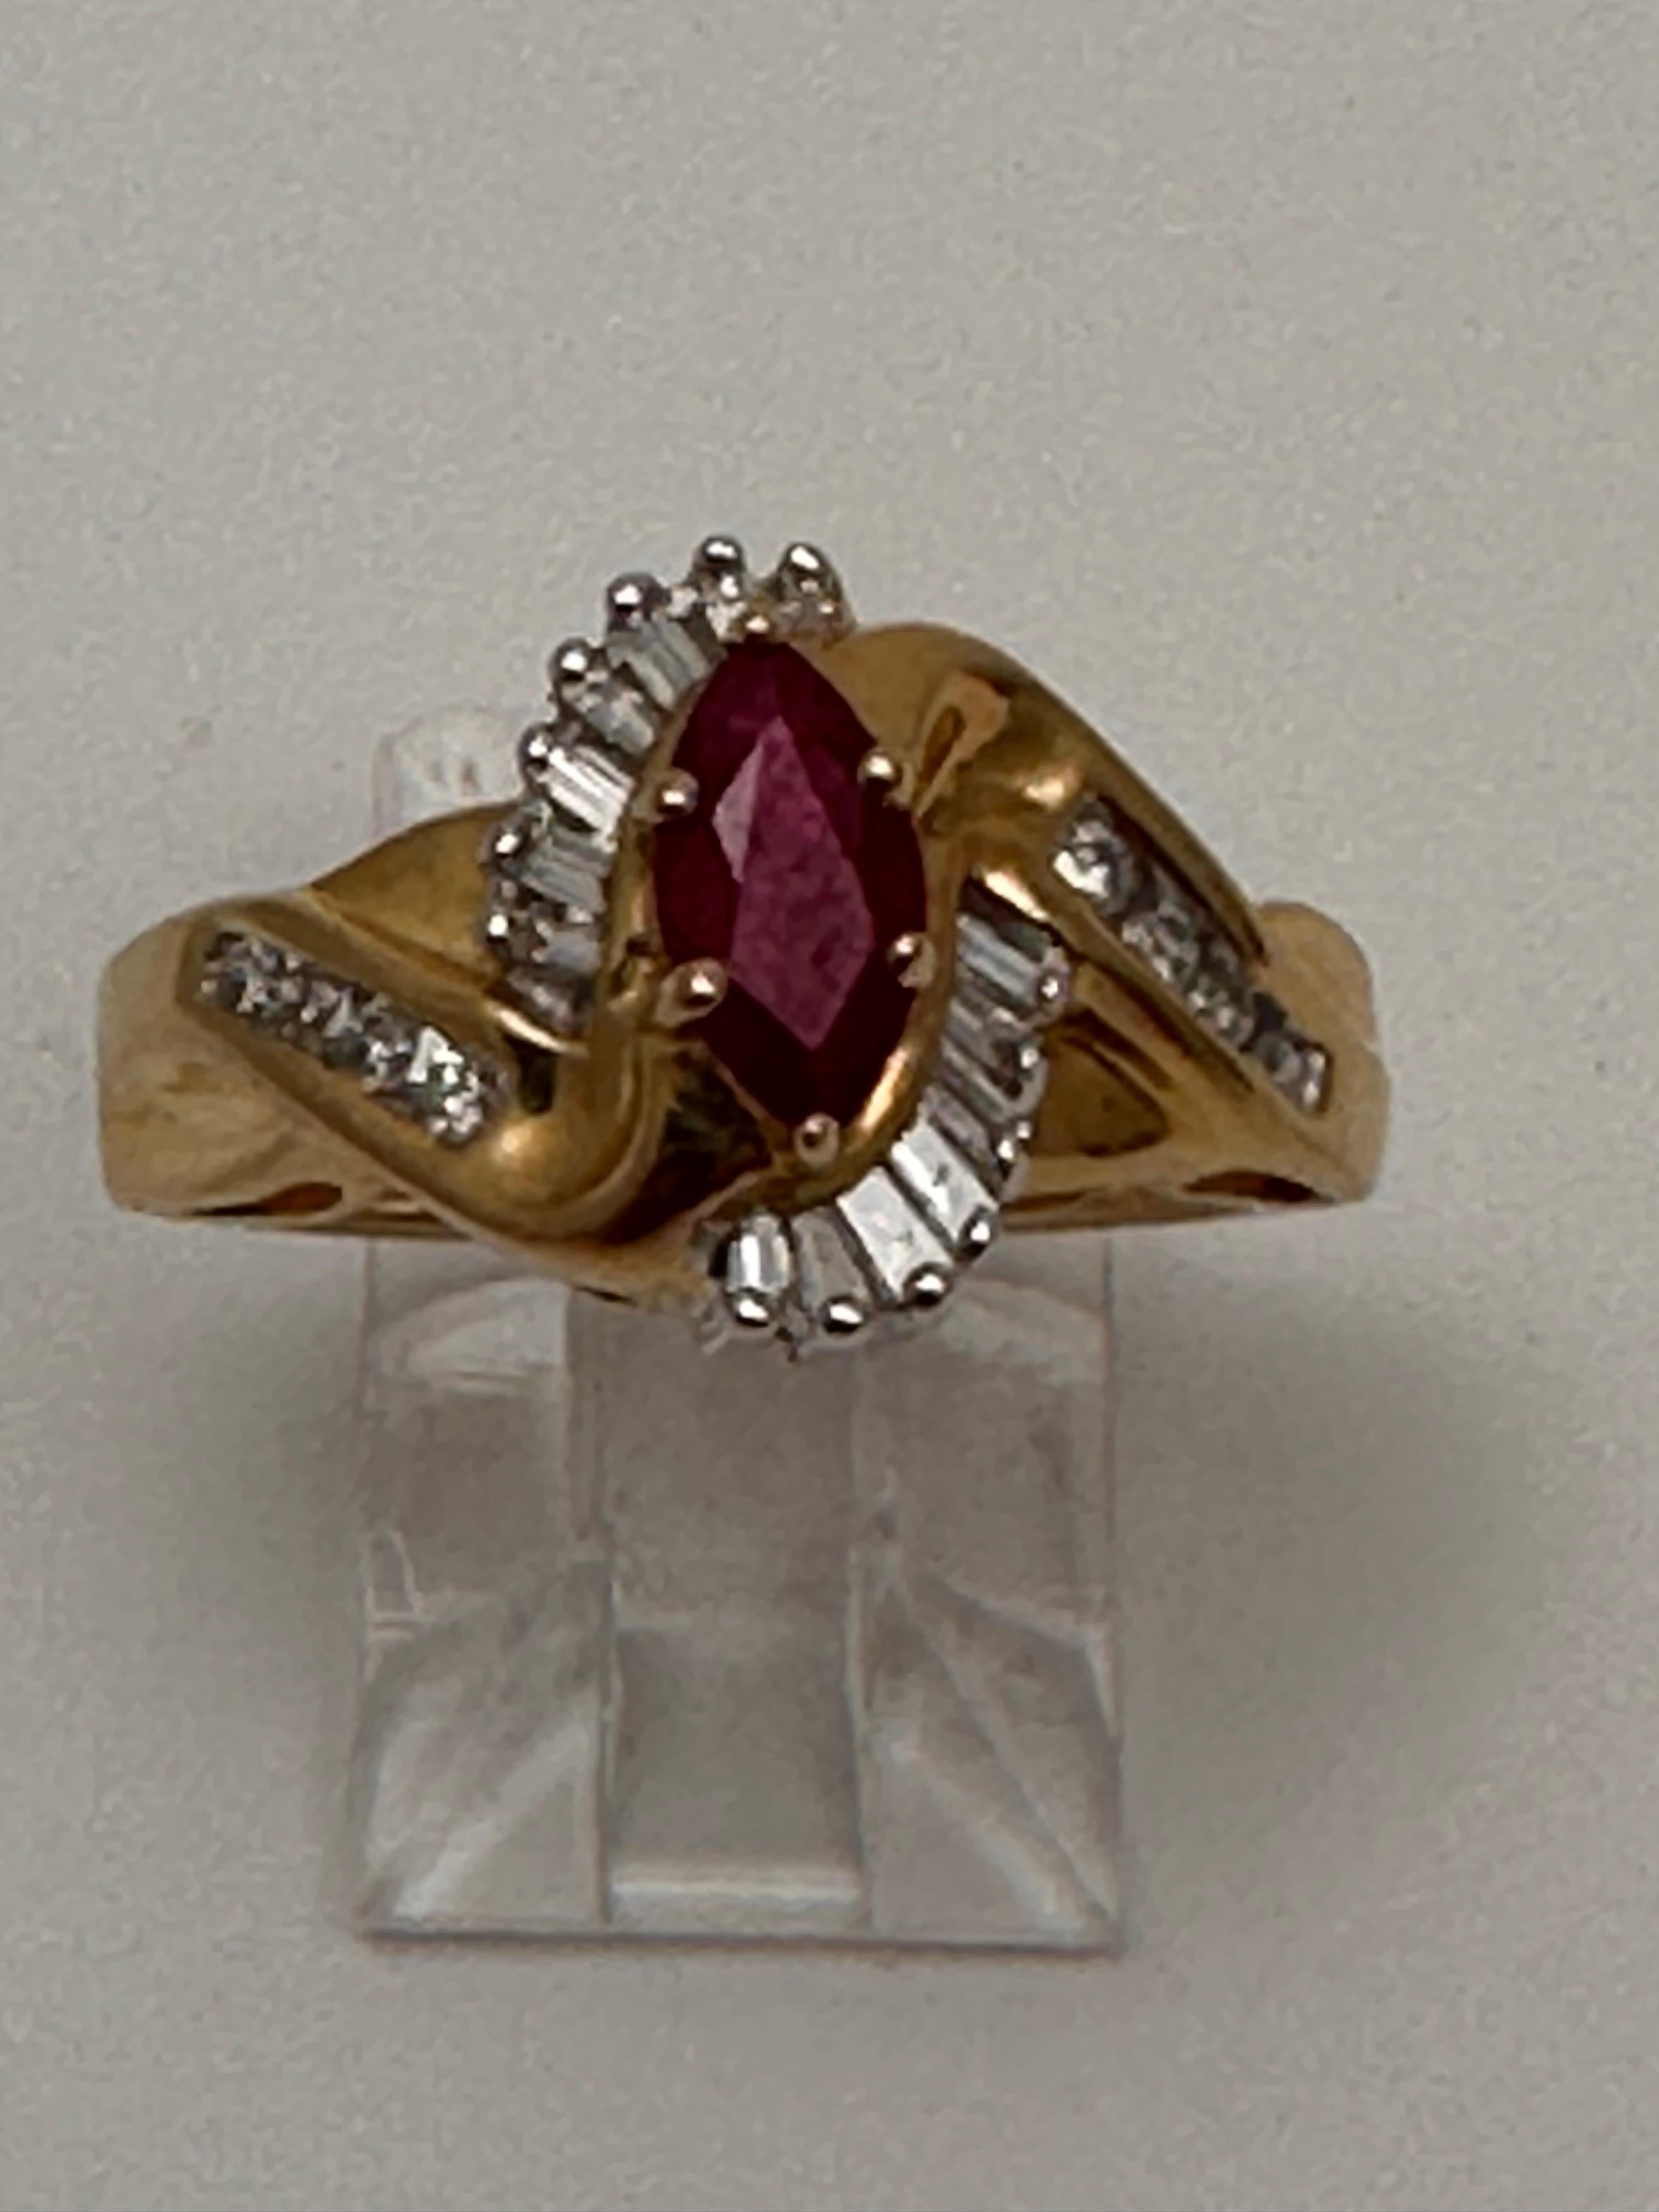 14k Yellow Gold approx. 4mm x 8mm Marquise Ruby wtih baguettes and round Diamonds
Ring Size 7

Ruby is believed to promote loving, nurturing, health, knowledge and wealth. It has been associated with improved energy and concentration, creativity,